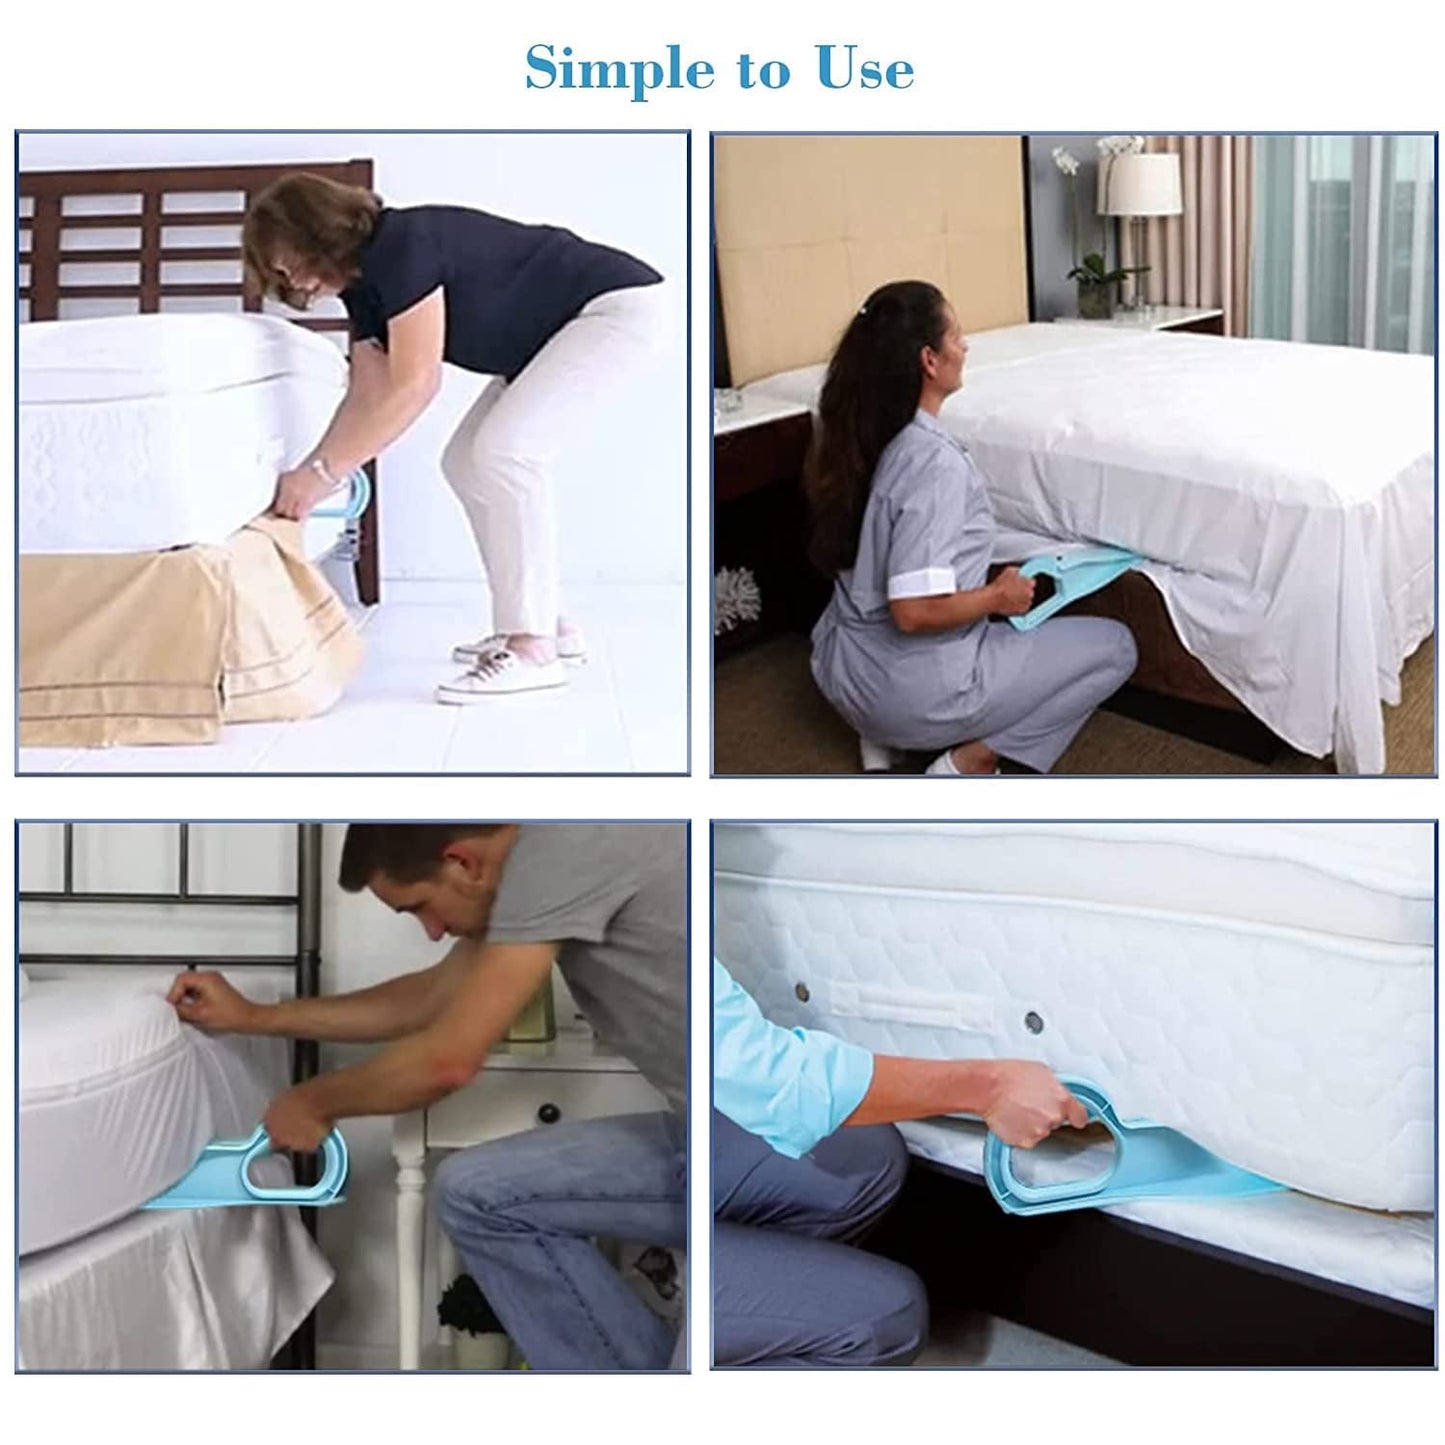 9013 Mattress Lifter Bed Making Aid, Change The Sheets Instantly helping Tool ( 1 pc ) DeoDap